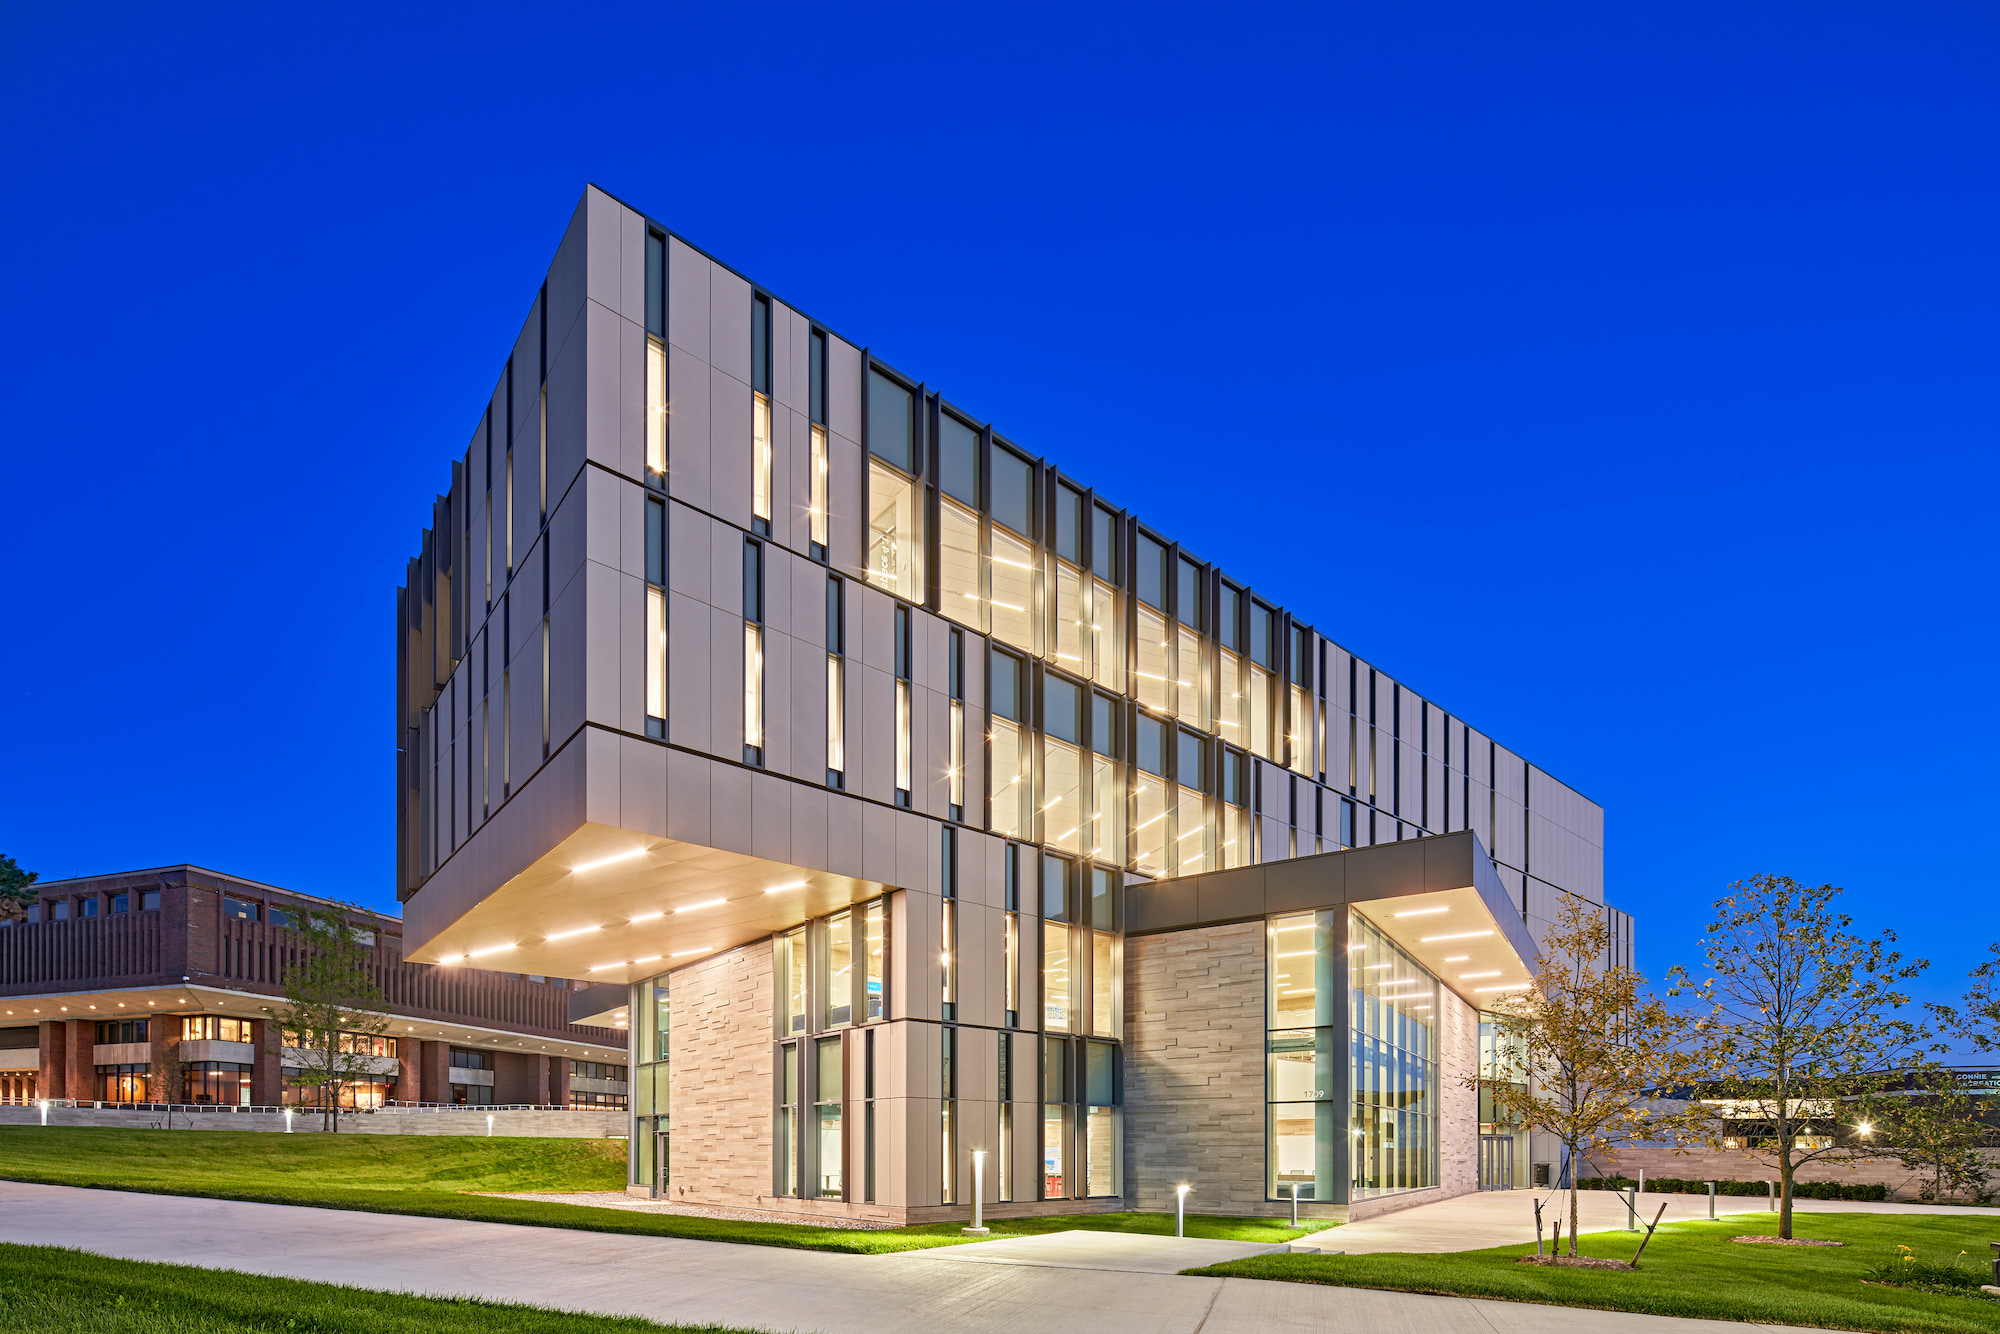 Kettering University Learning Commons designed by Stantec, Jason Keen Photography 7.jpeg